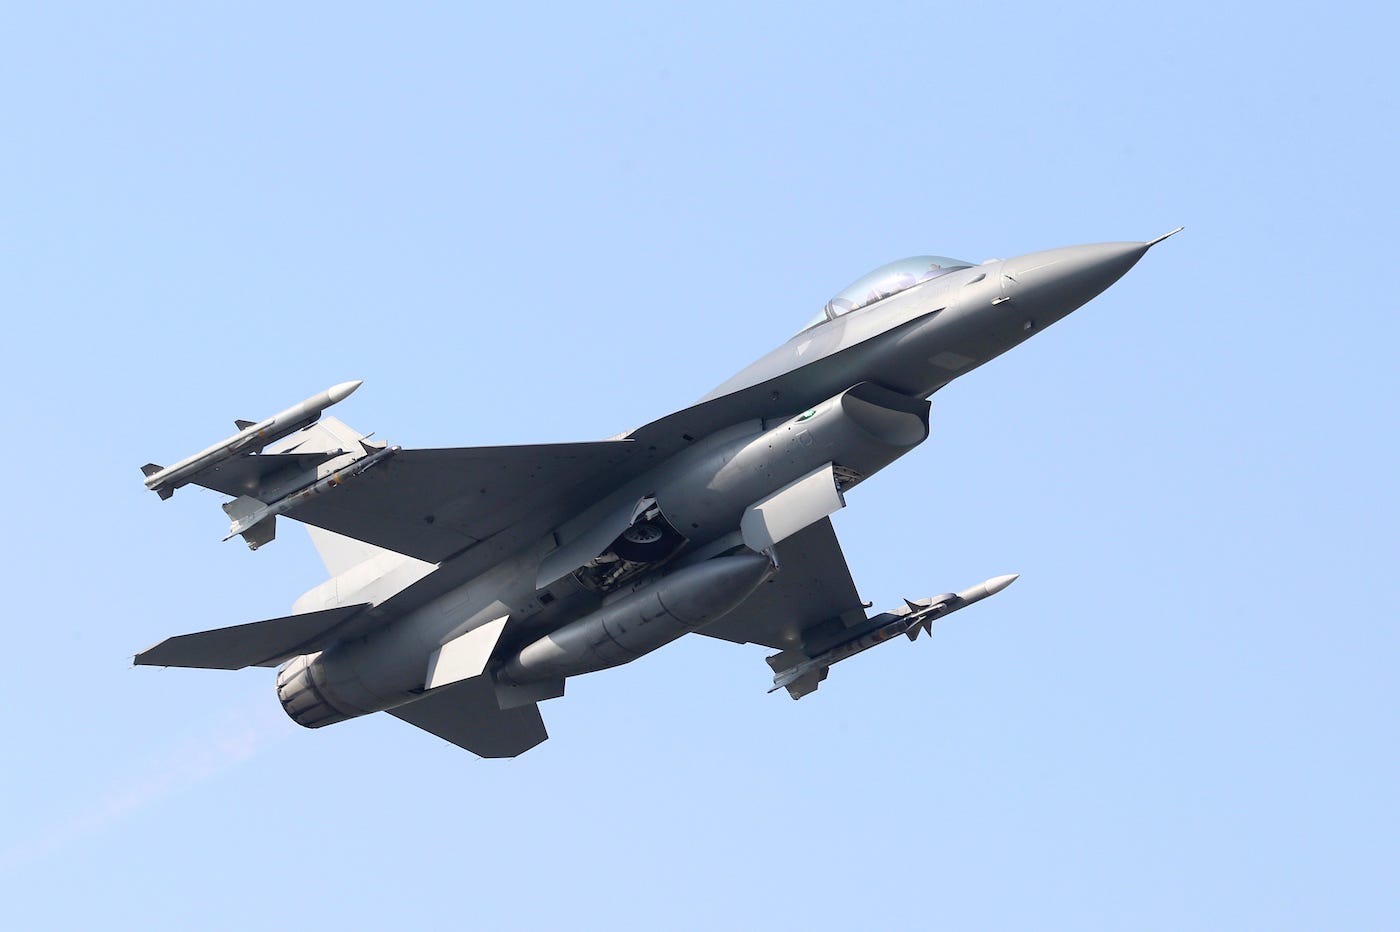 Taiwan air force F-16 fighter jet